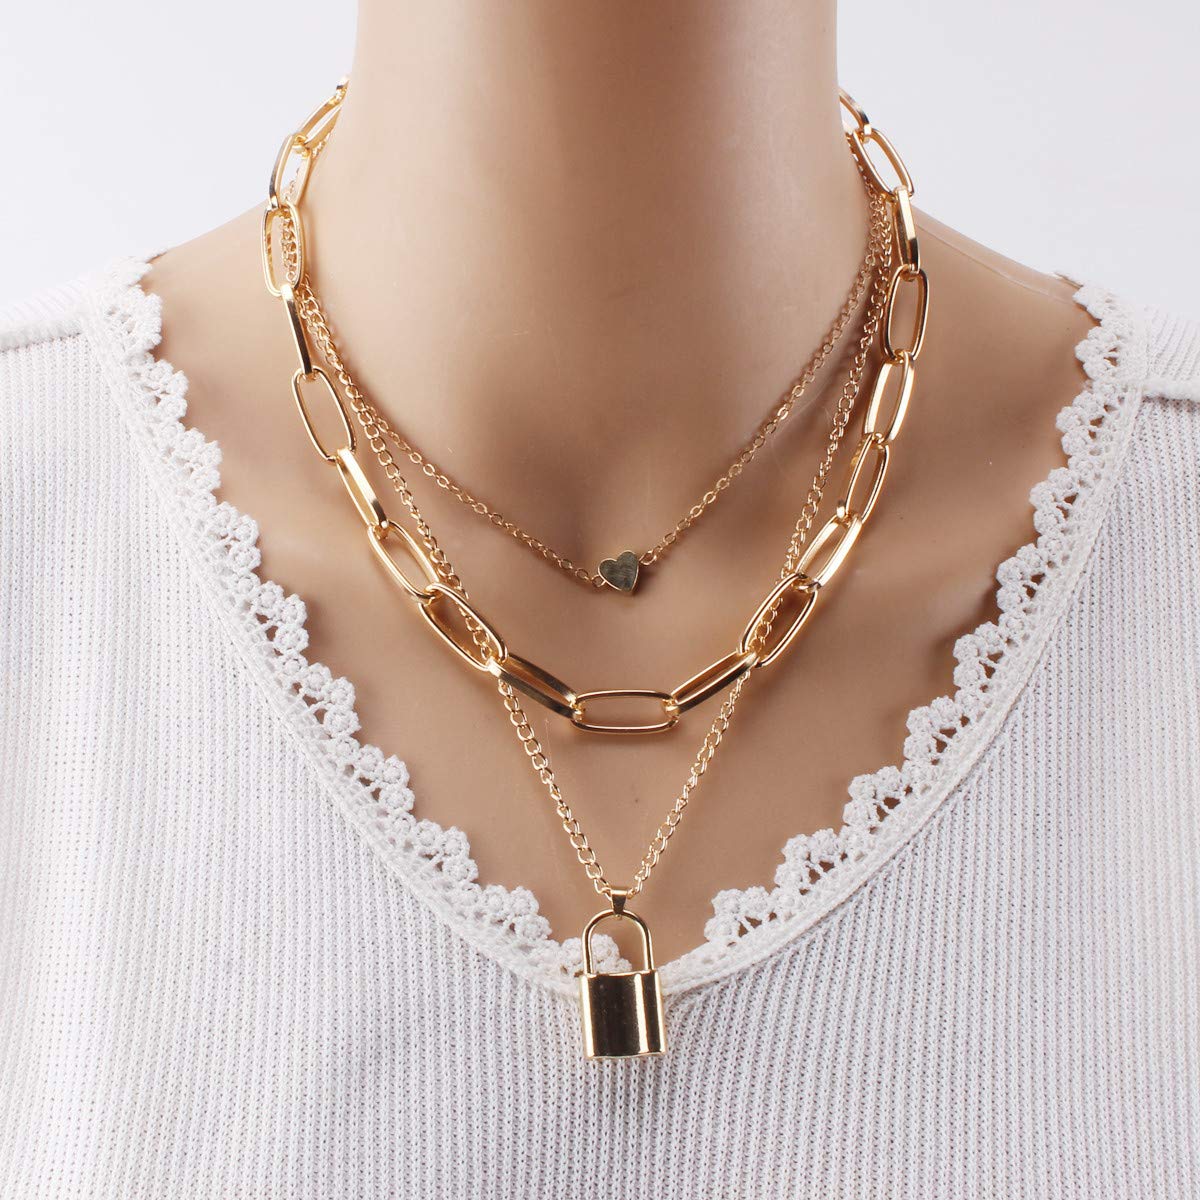 Yellow Chimes Trendy Fashion Multilayered Key Heart Locket Gold Plated Alloy Chain Choker Necklace for Women and Girls